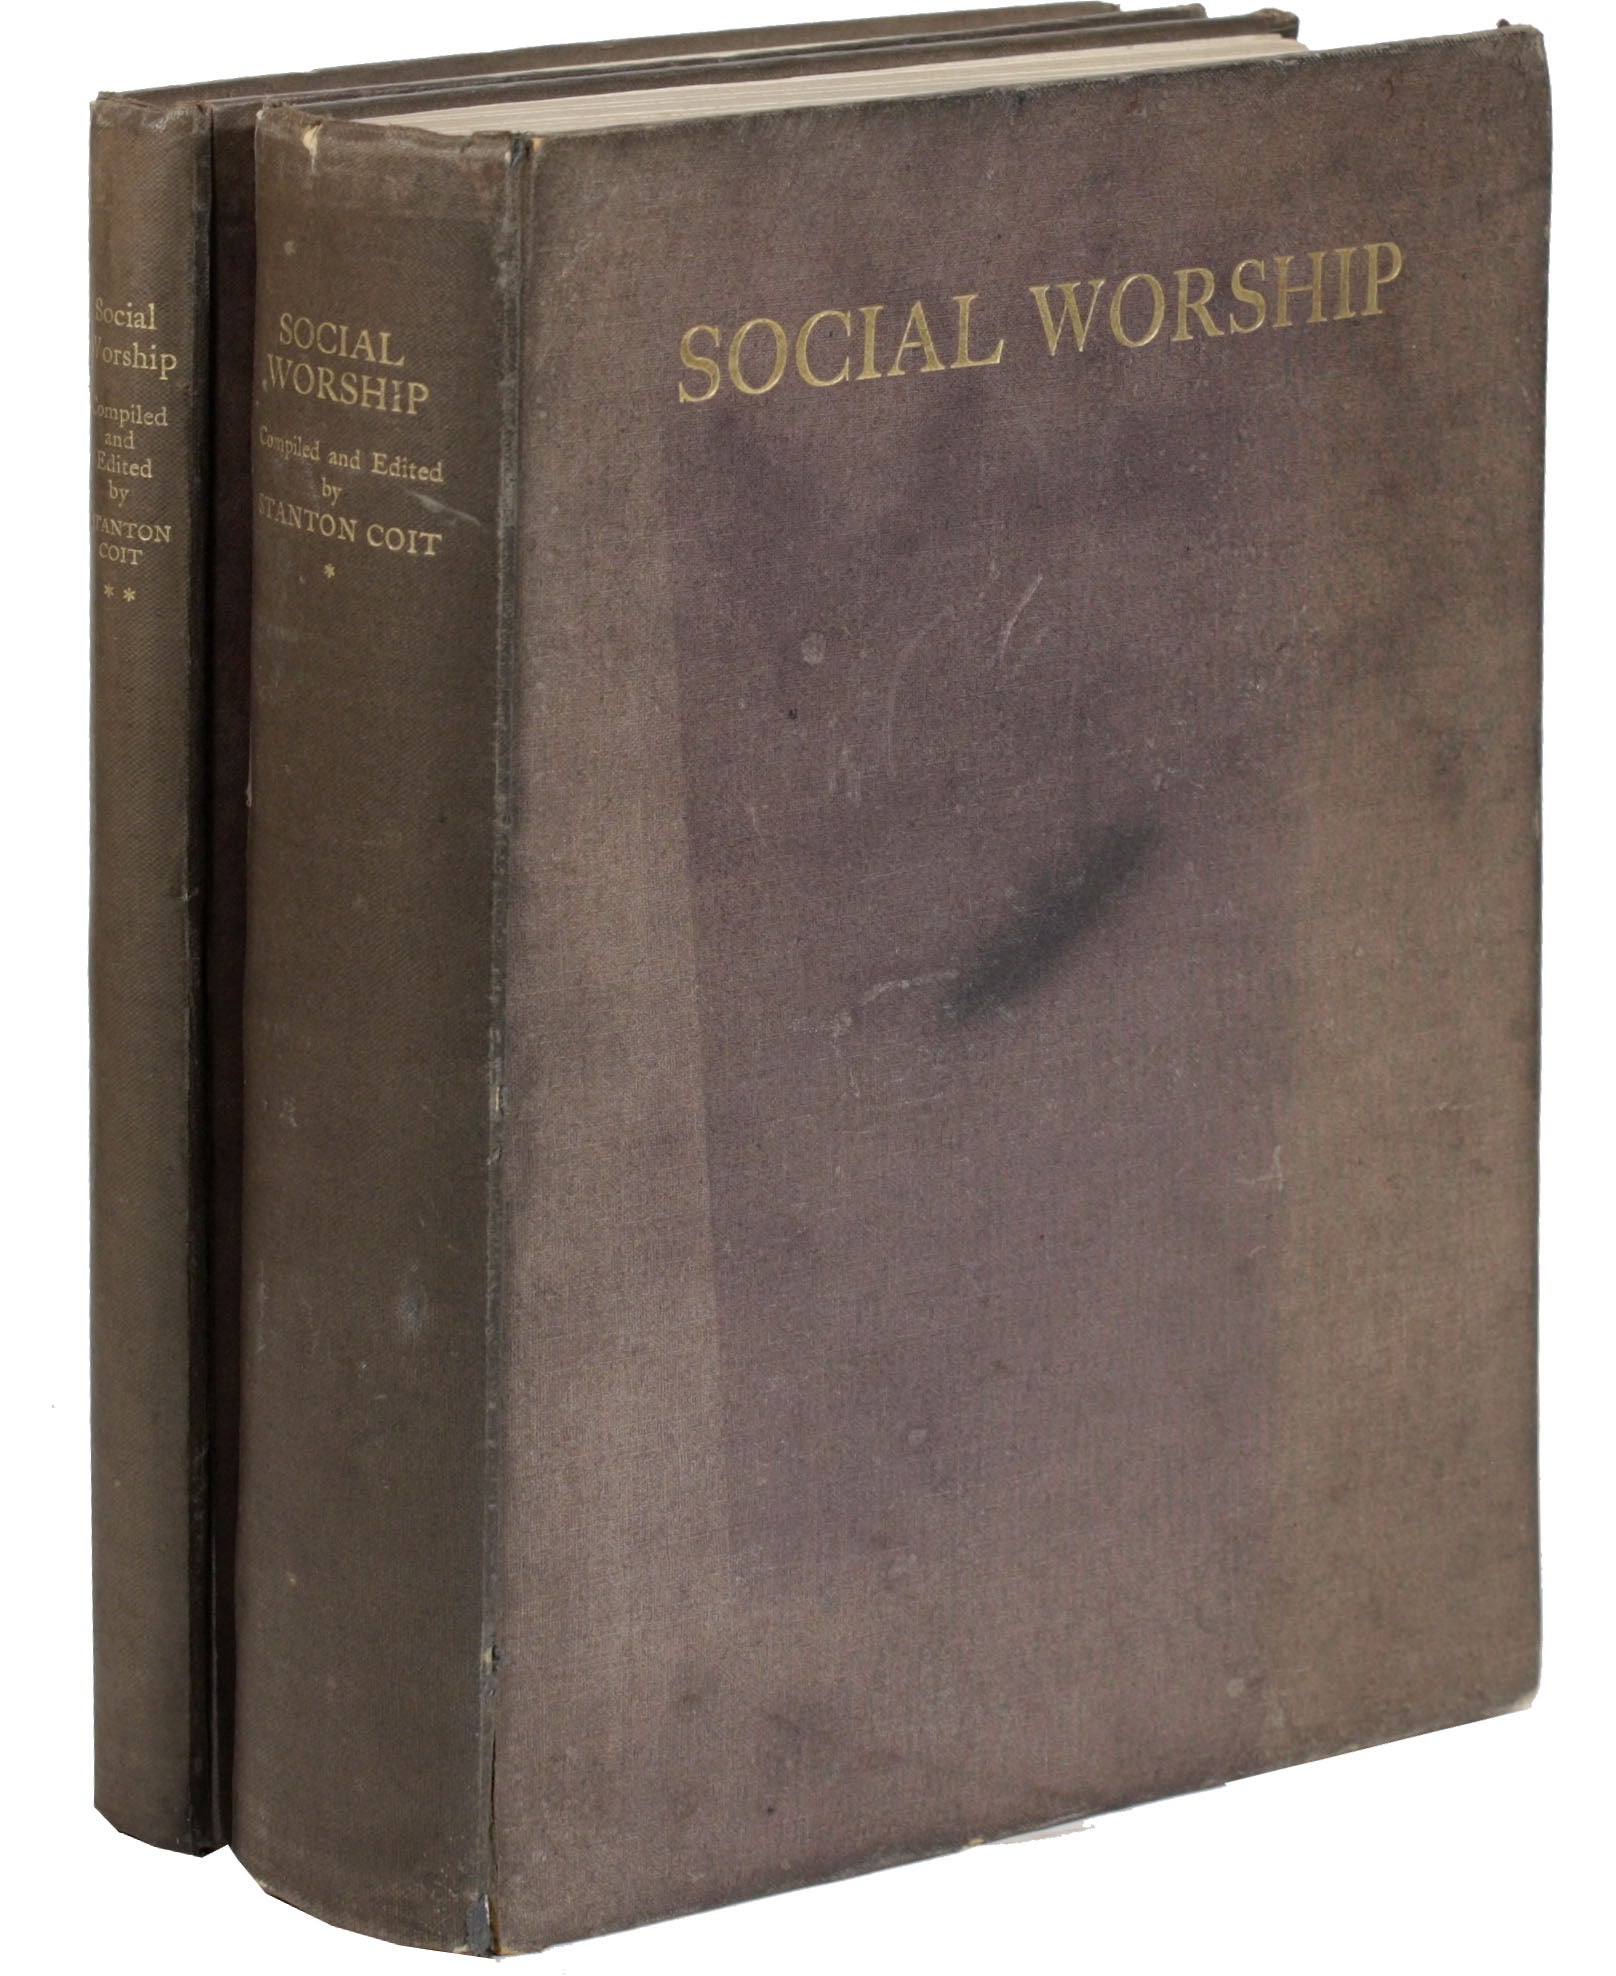 [Item #15746] Social Worship for Use In Families Schools & Churches [...] Issued on Behalf of the West London Ethical Society as a Memorial of its Twenty-First Anniversary. FREETHOUGHT, Stanton COIT, ETHICAL CULTURE.